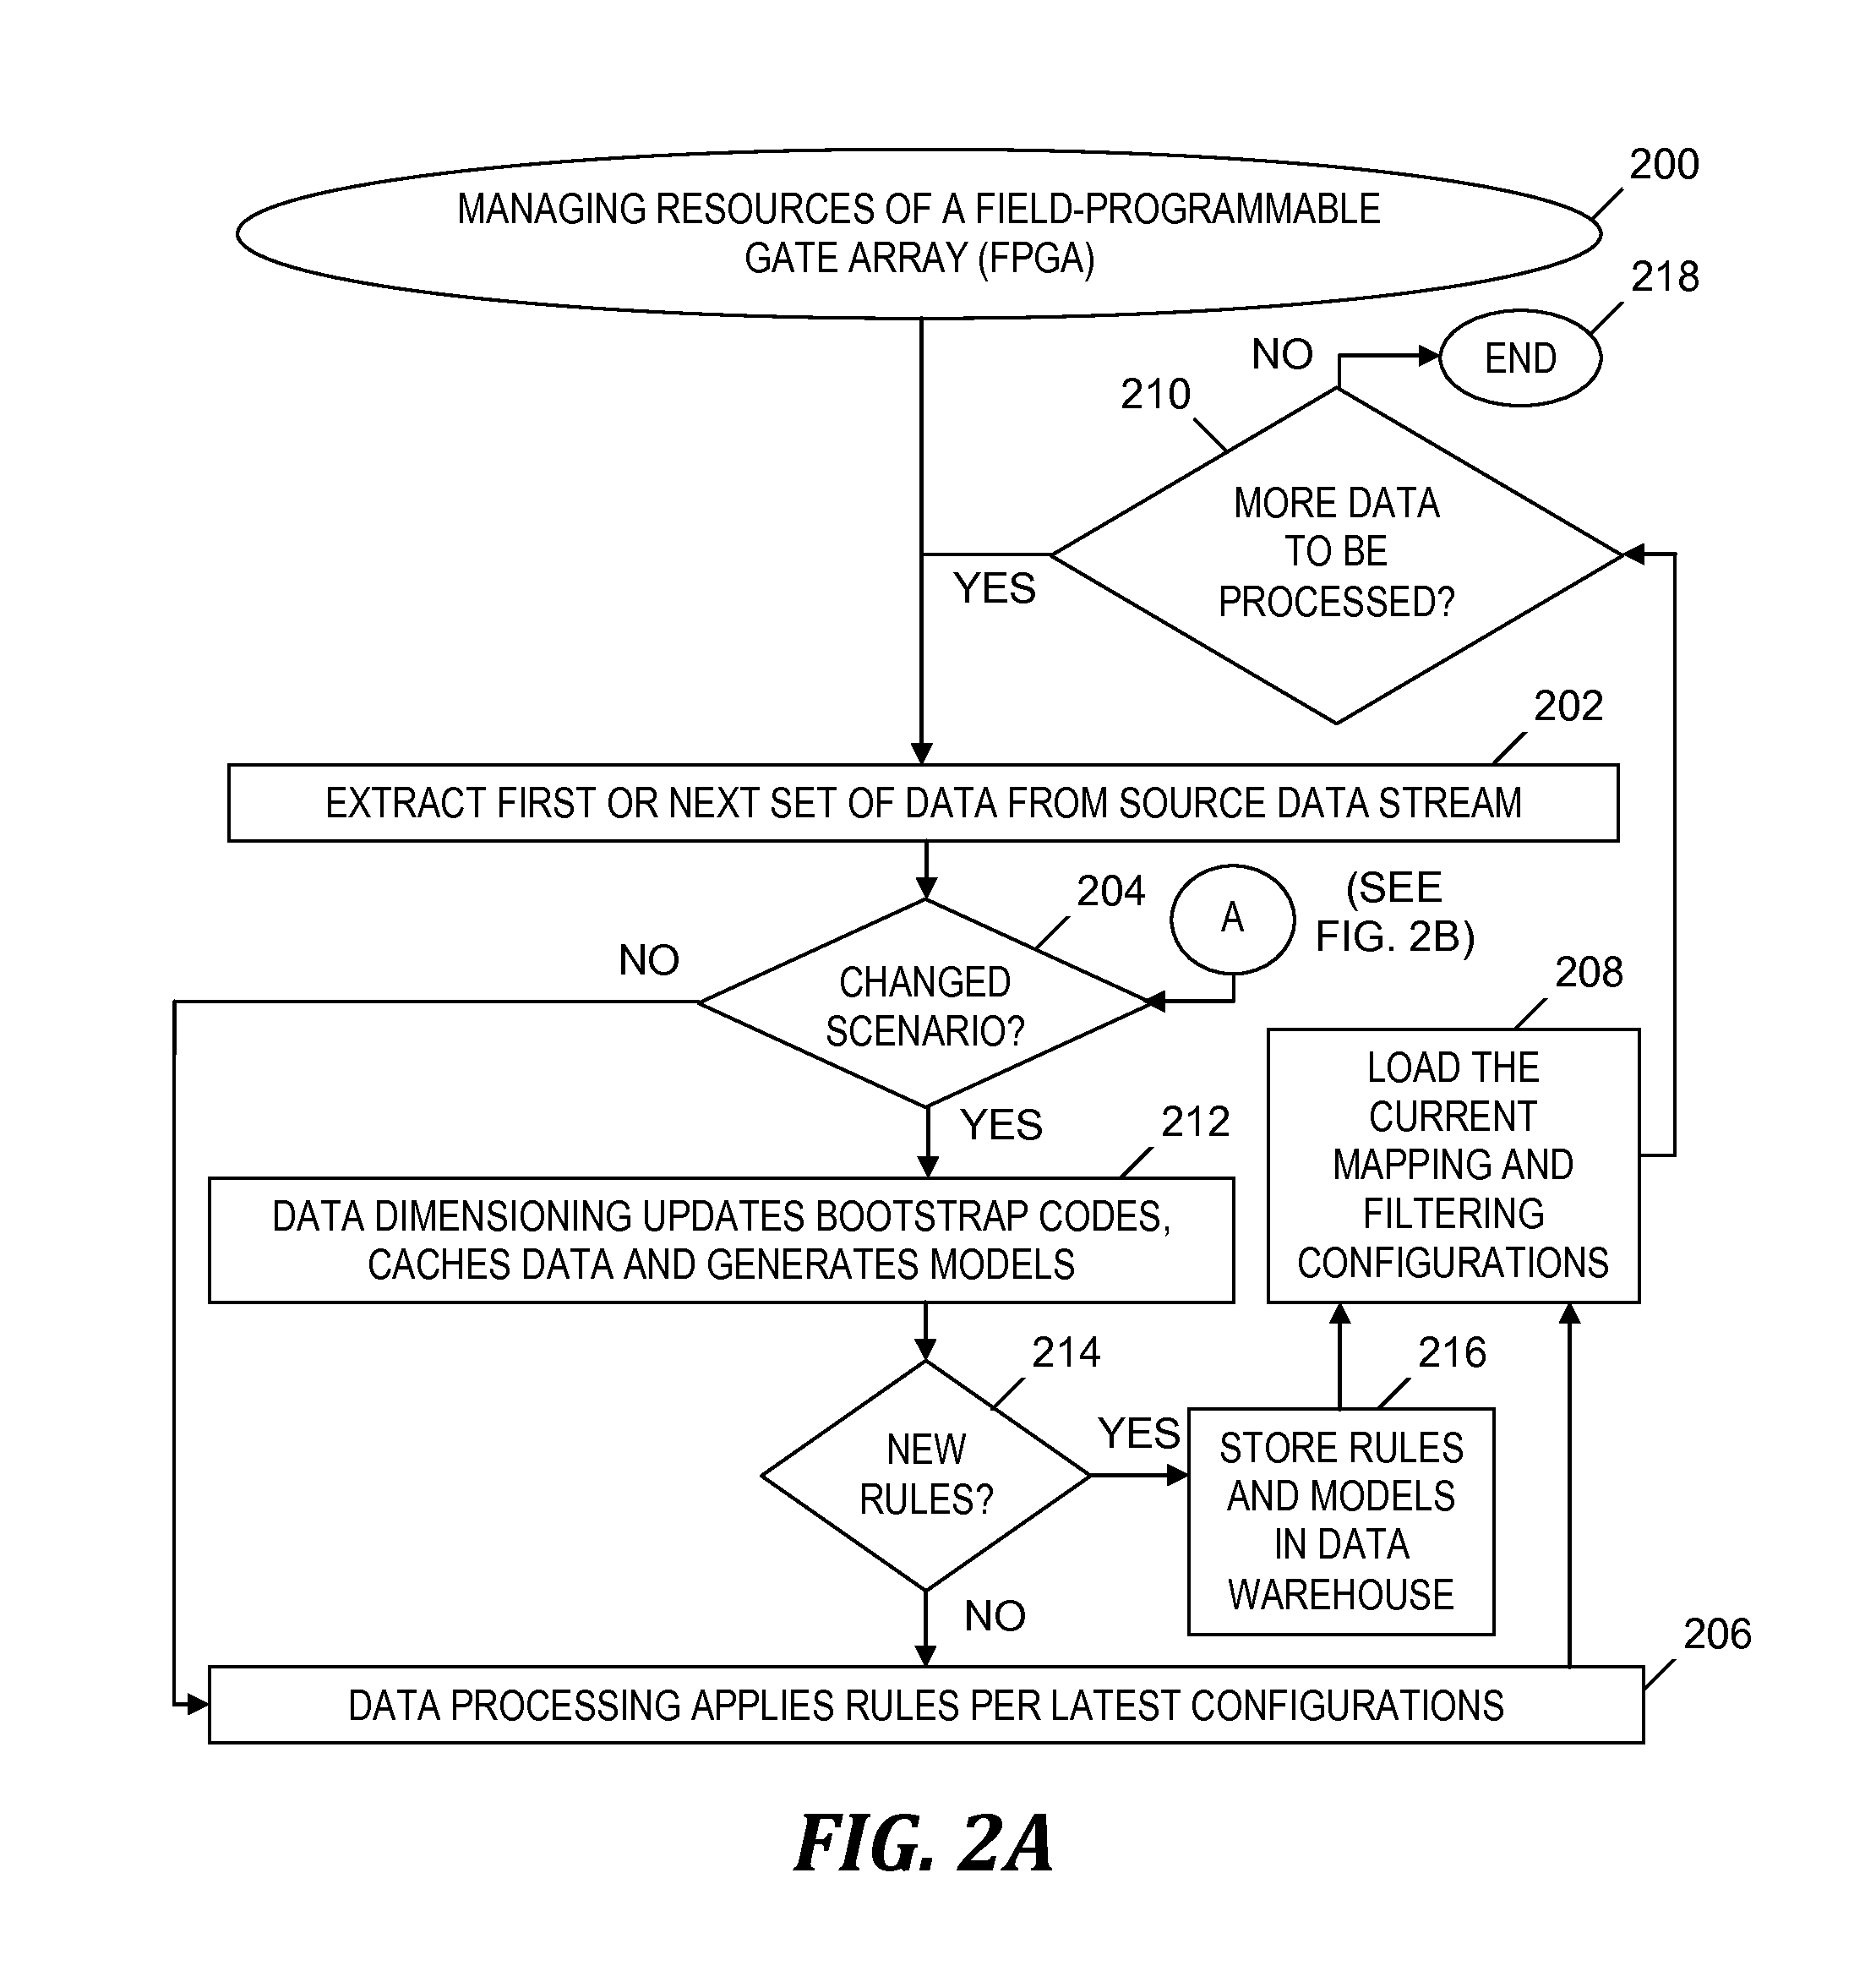 Dynamic Data Dimensioning by Partial Reconfiguration of Single or Multiple Field-Programmable Gate Arrays Using Bootstraps